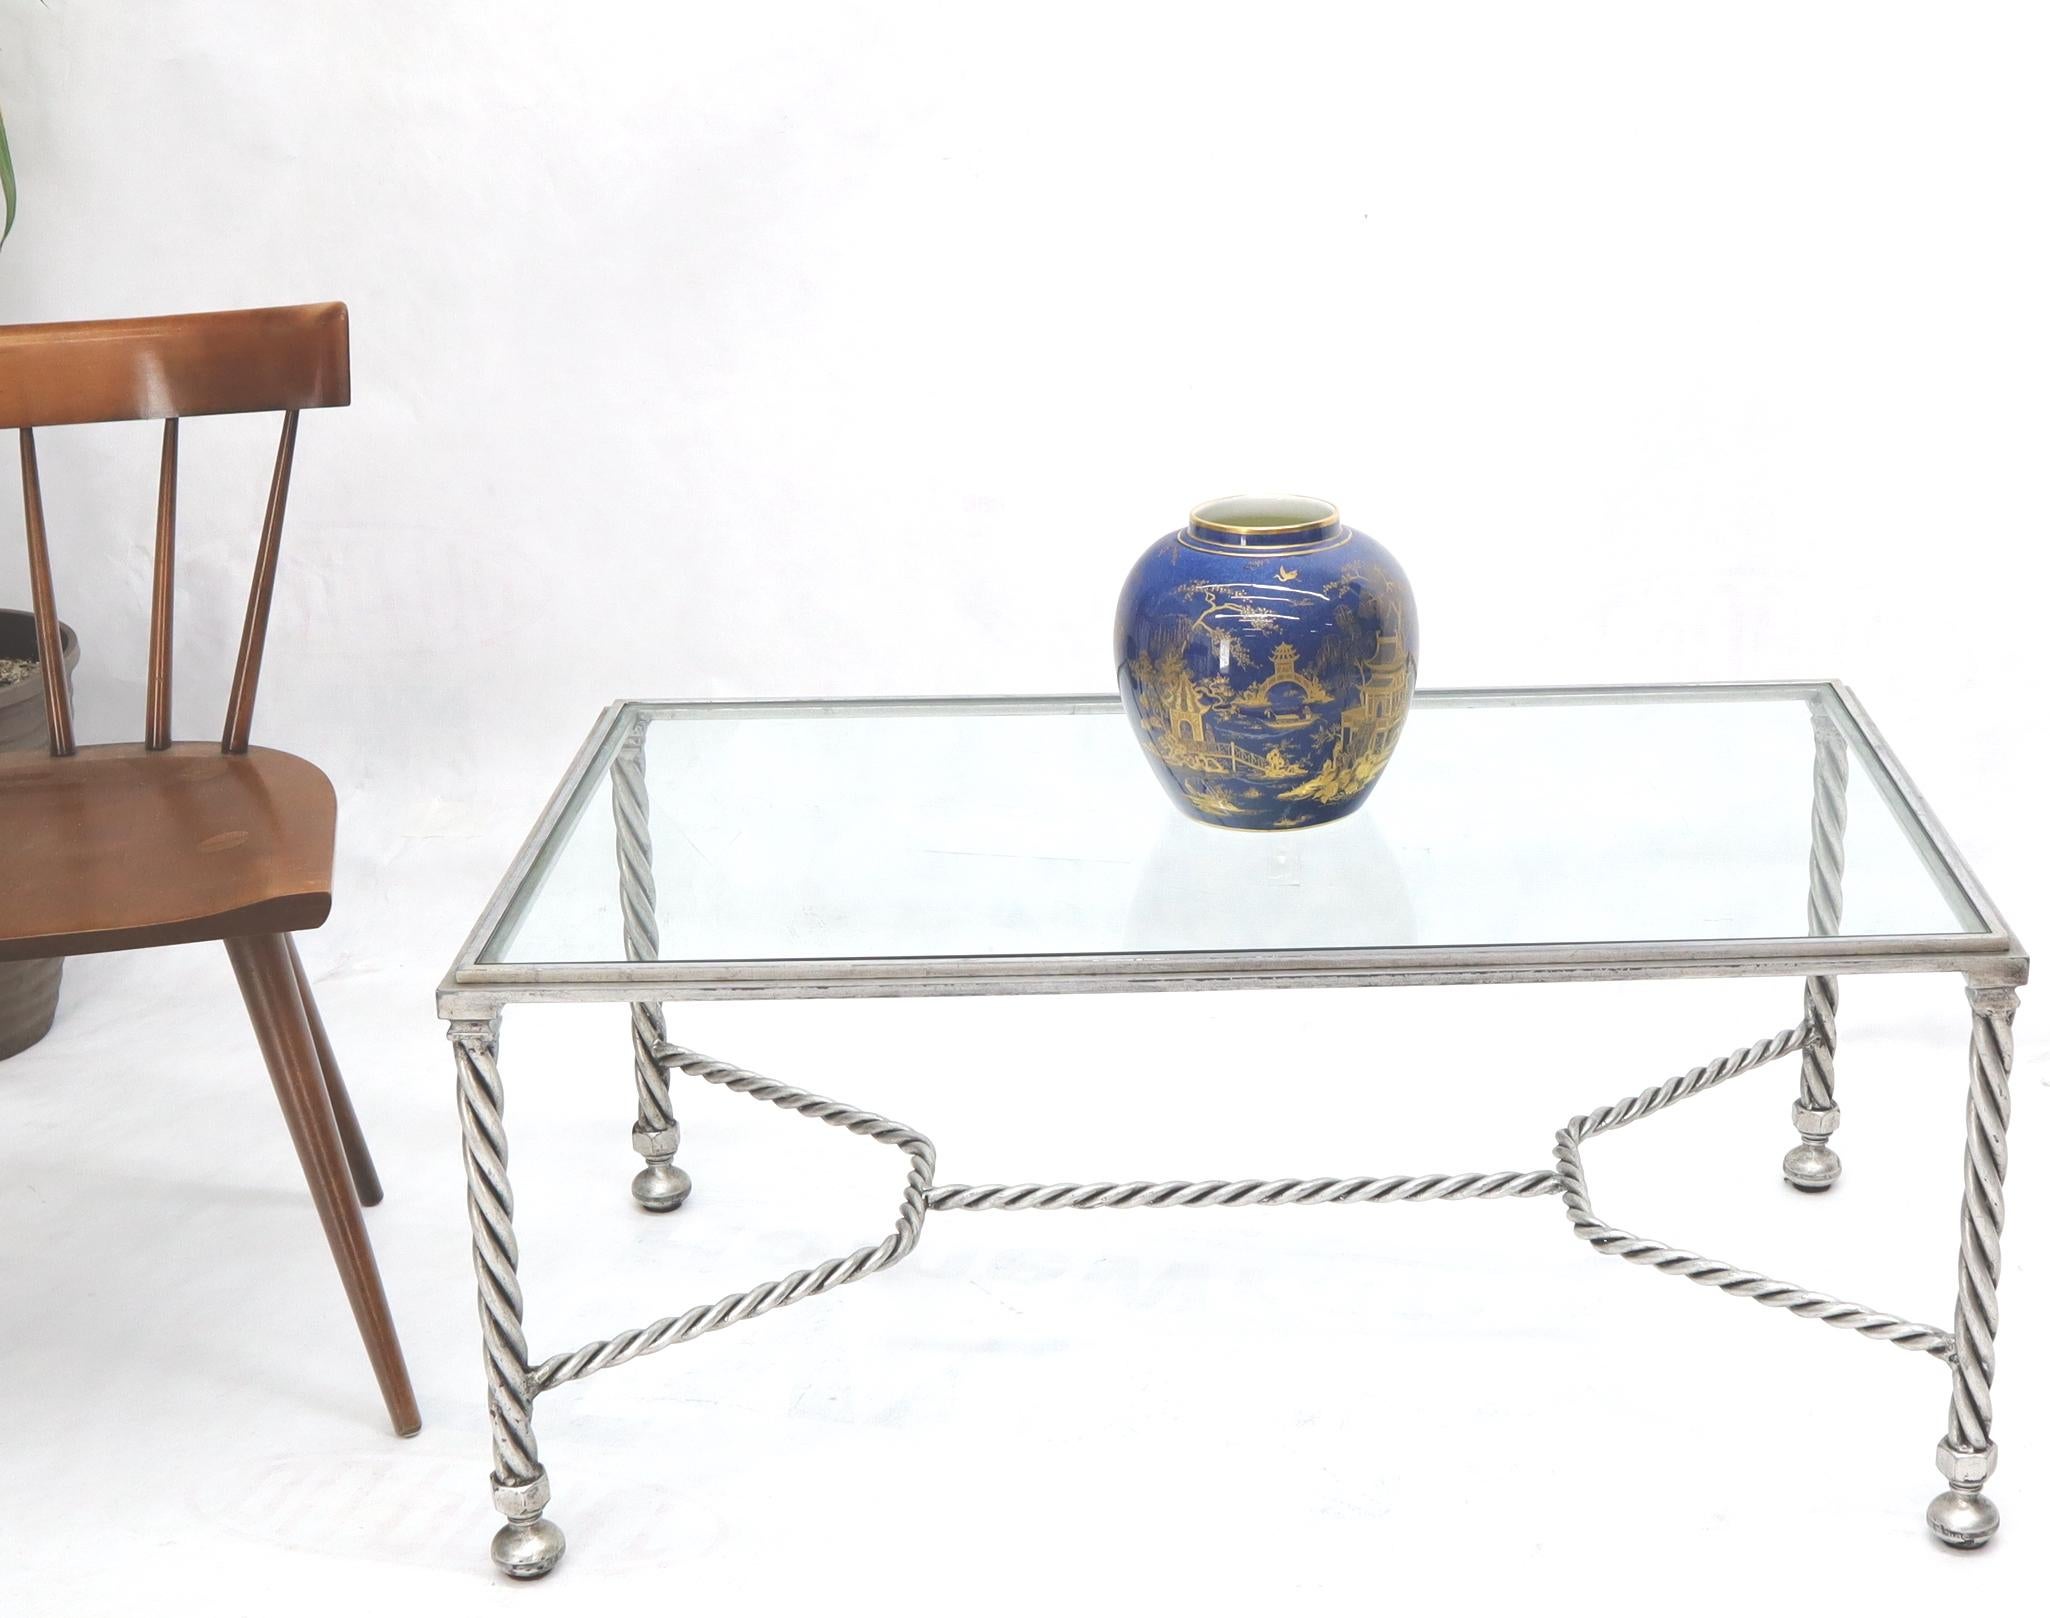 Decorative gilt silver twisted rope style metal base coffee table on ball shape legs.